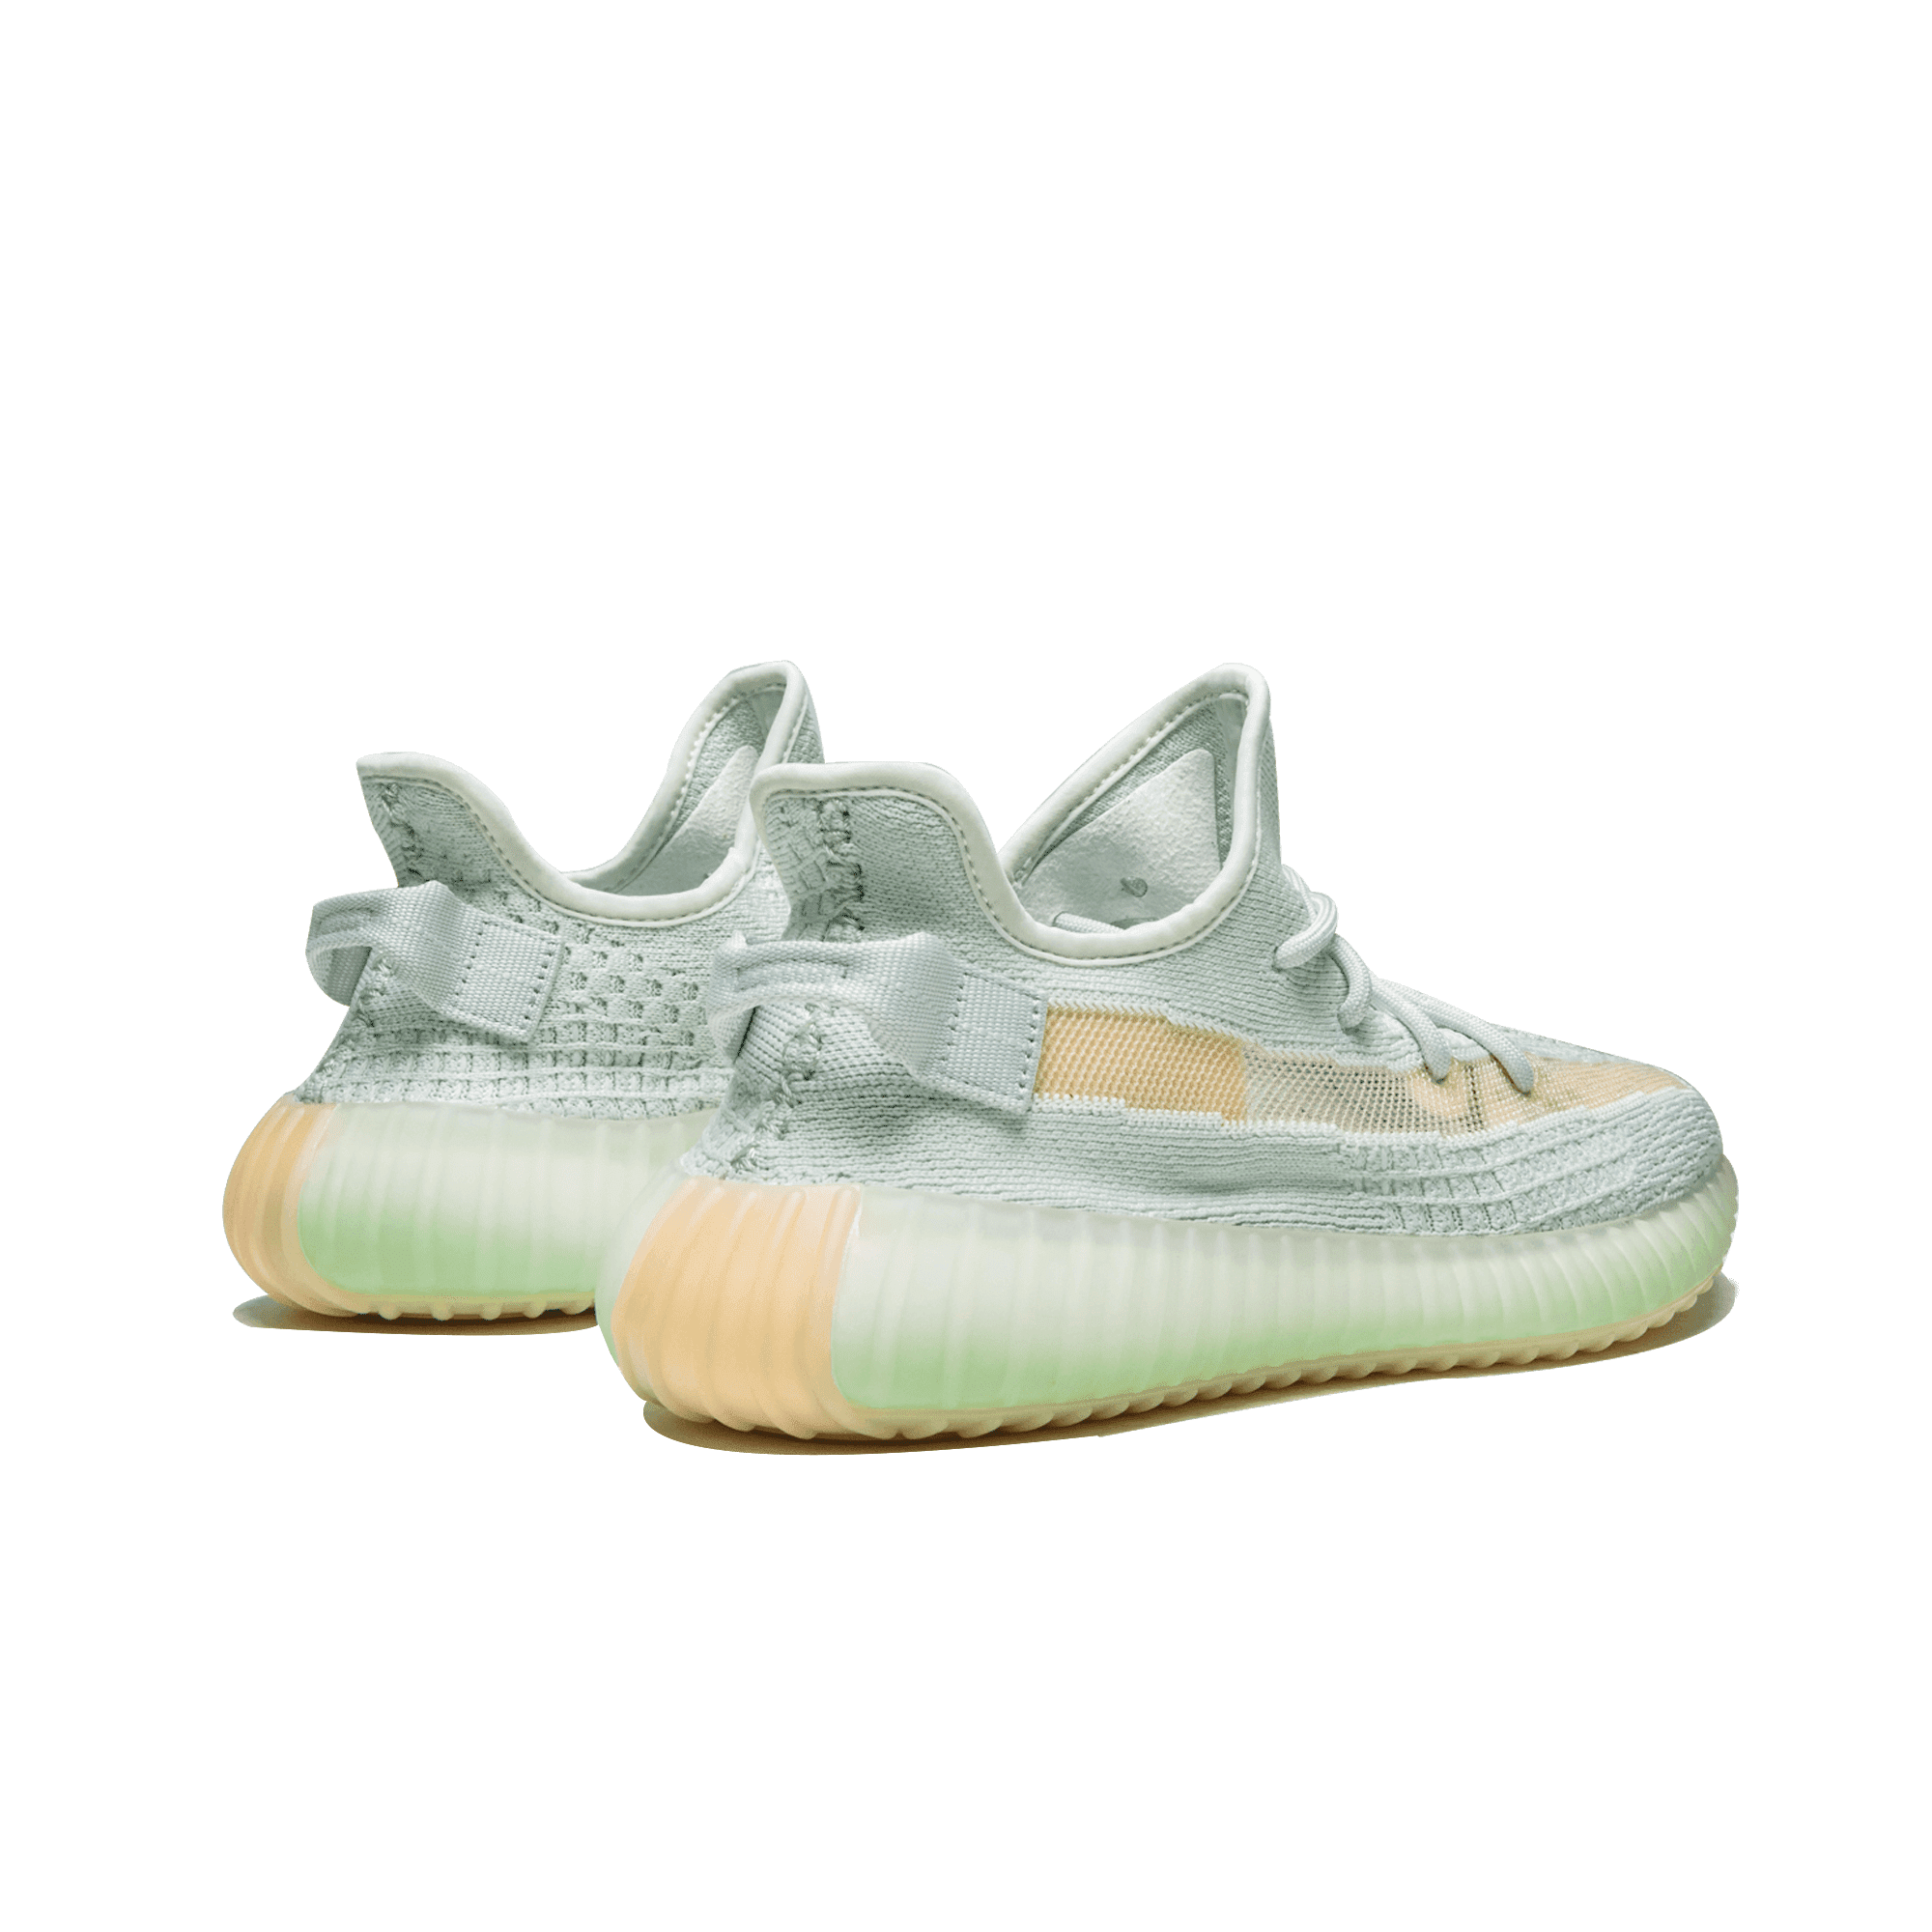 YEEZY BOOST 350 V2 "Hyperspace" (4014271168584)